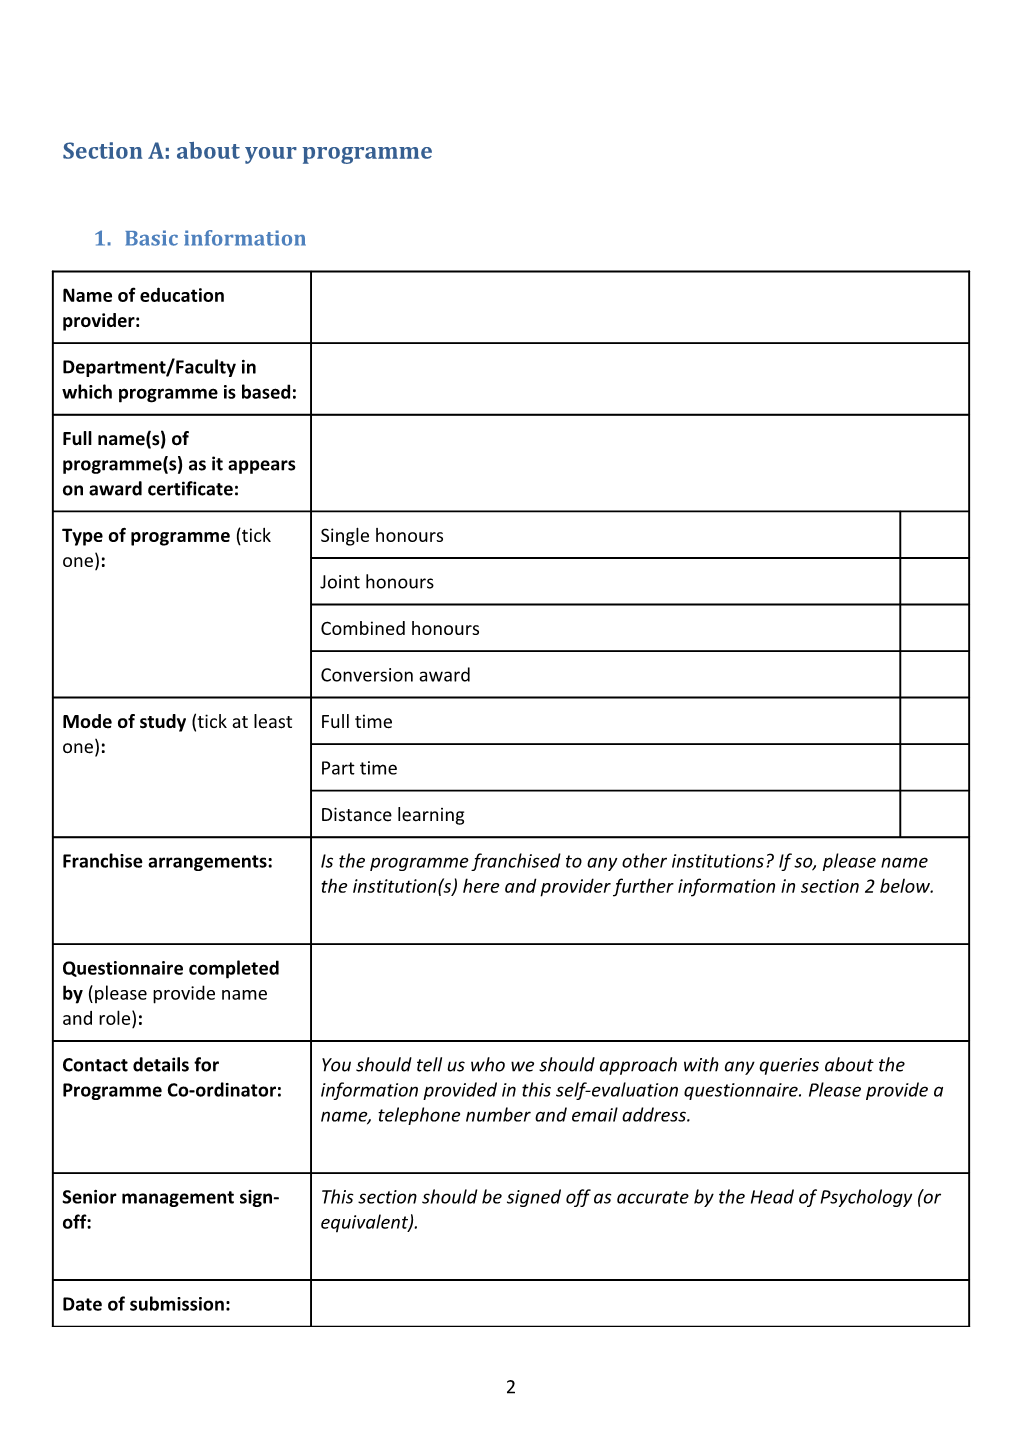 Self-Evaluation Questionnaire for Resource Reviews of Undergraduate and Conversion Programmes